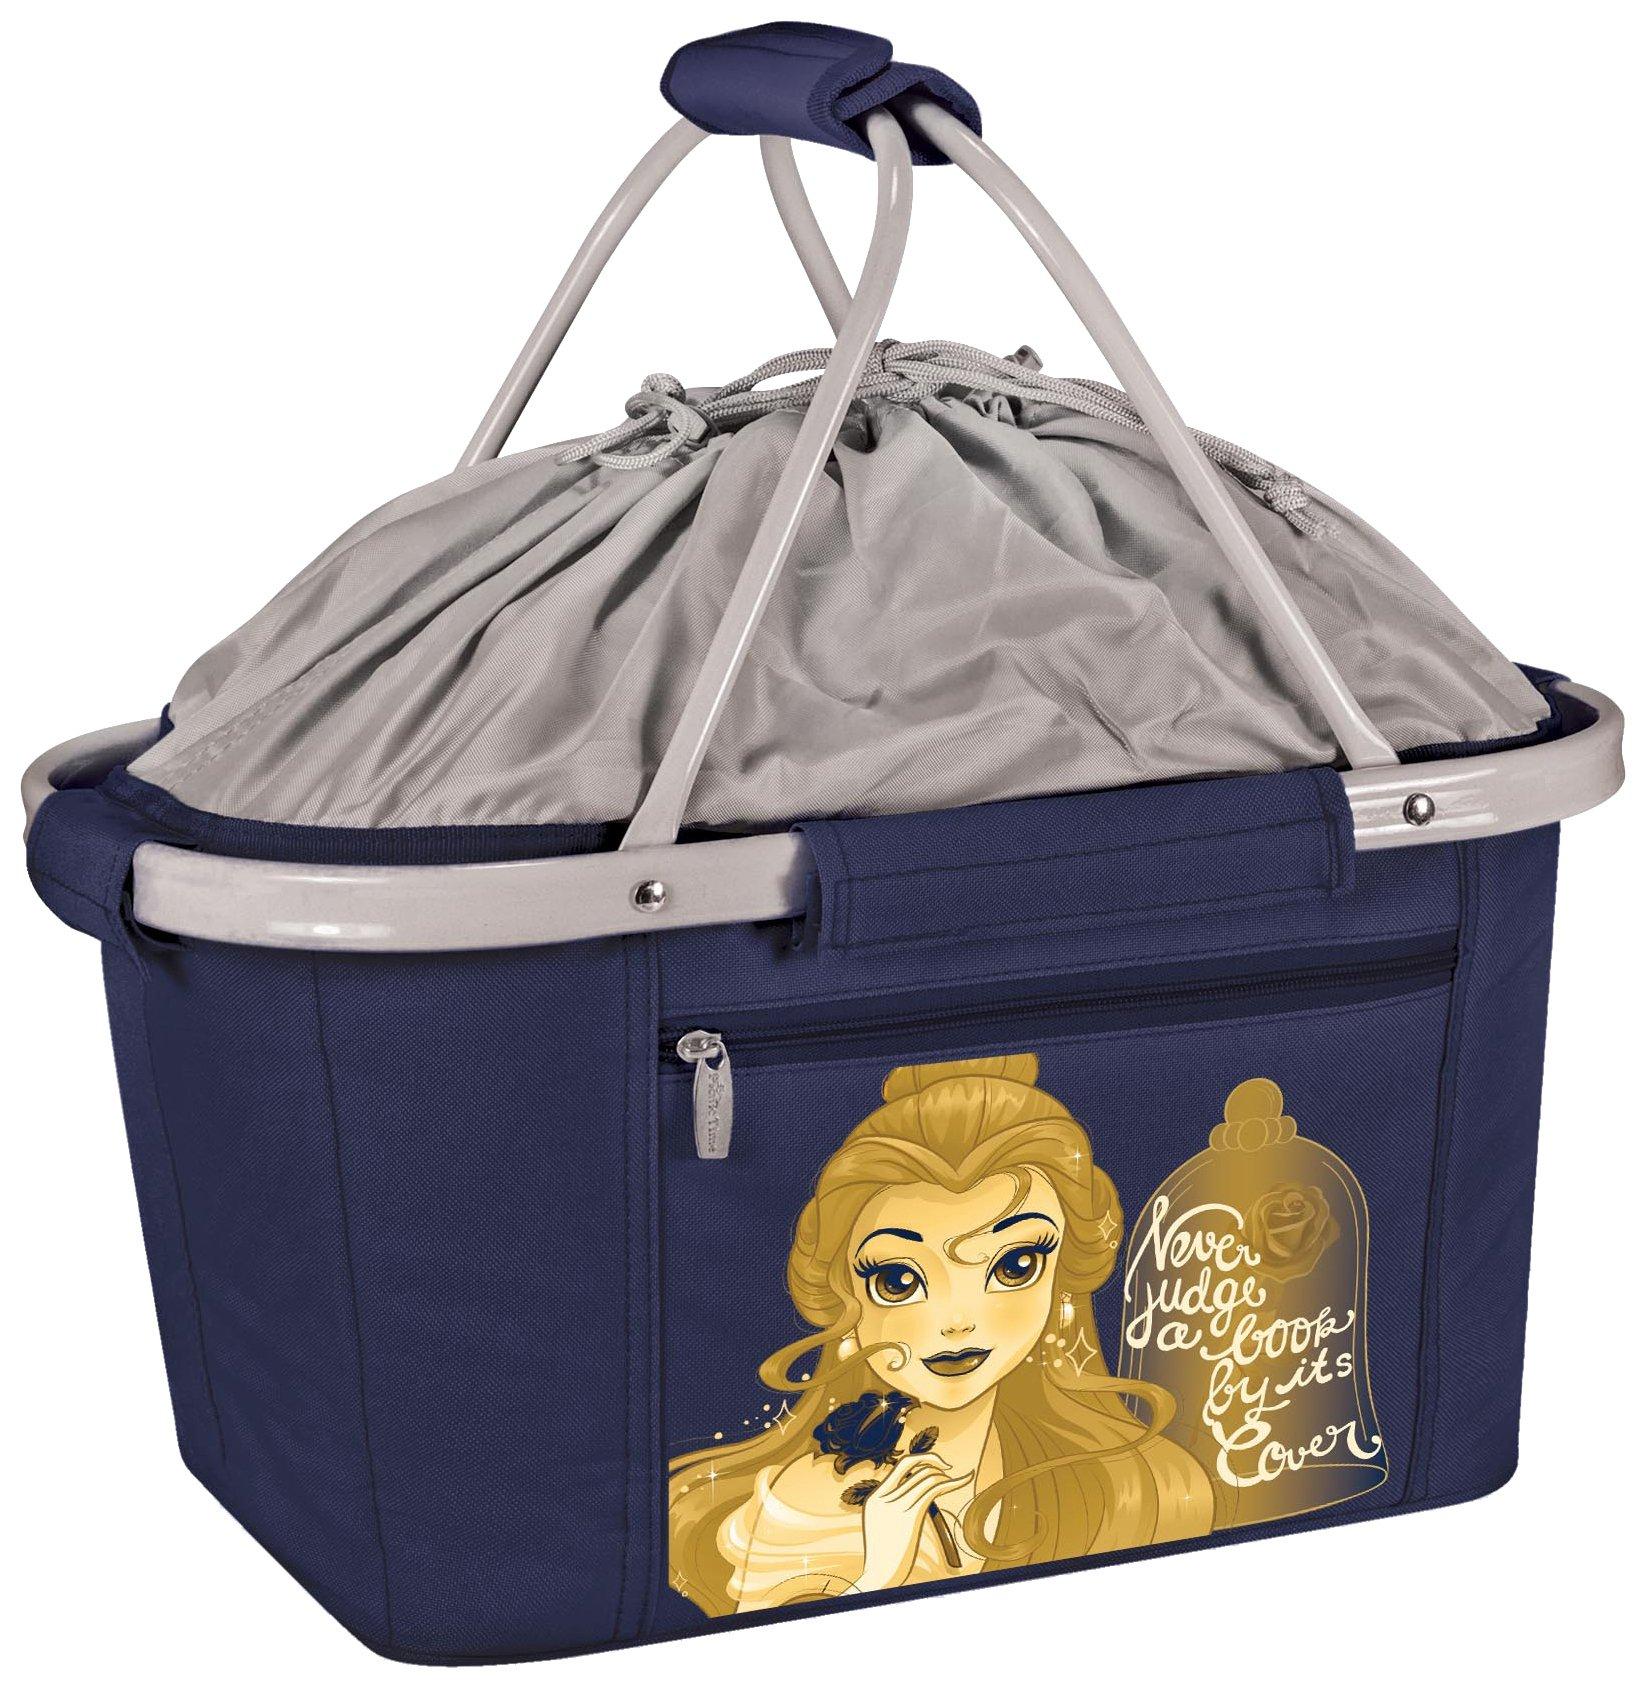 Oniva Beauty & the Beast Metro Collapsible Basket Tote